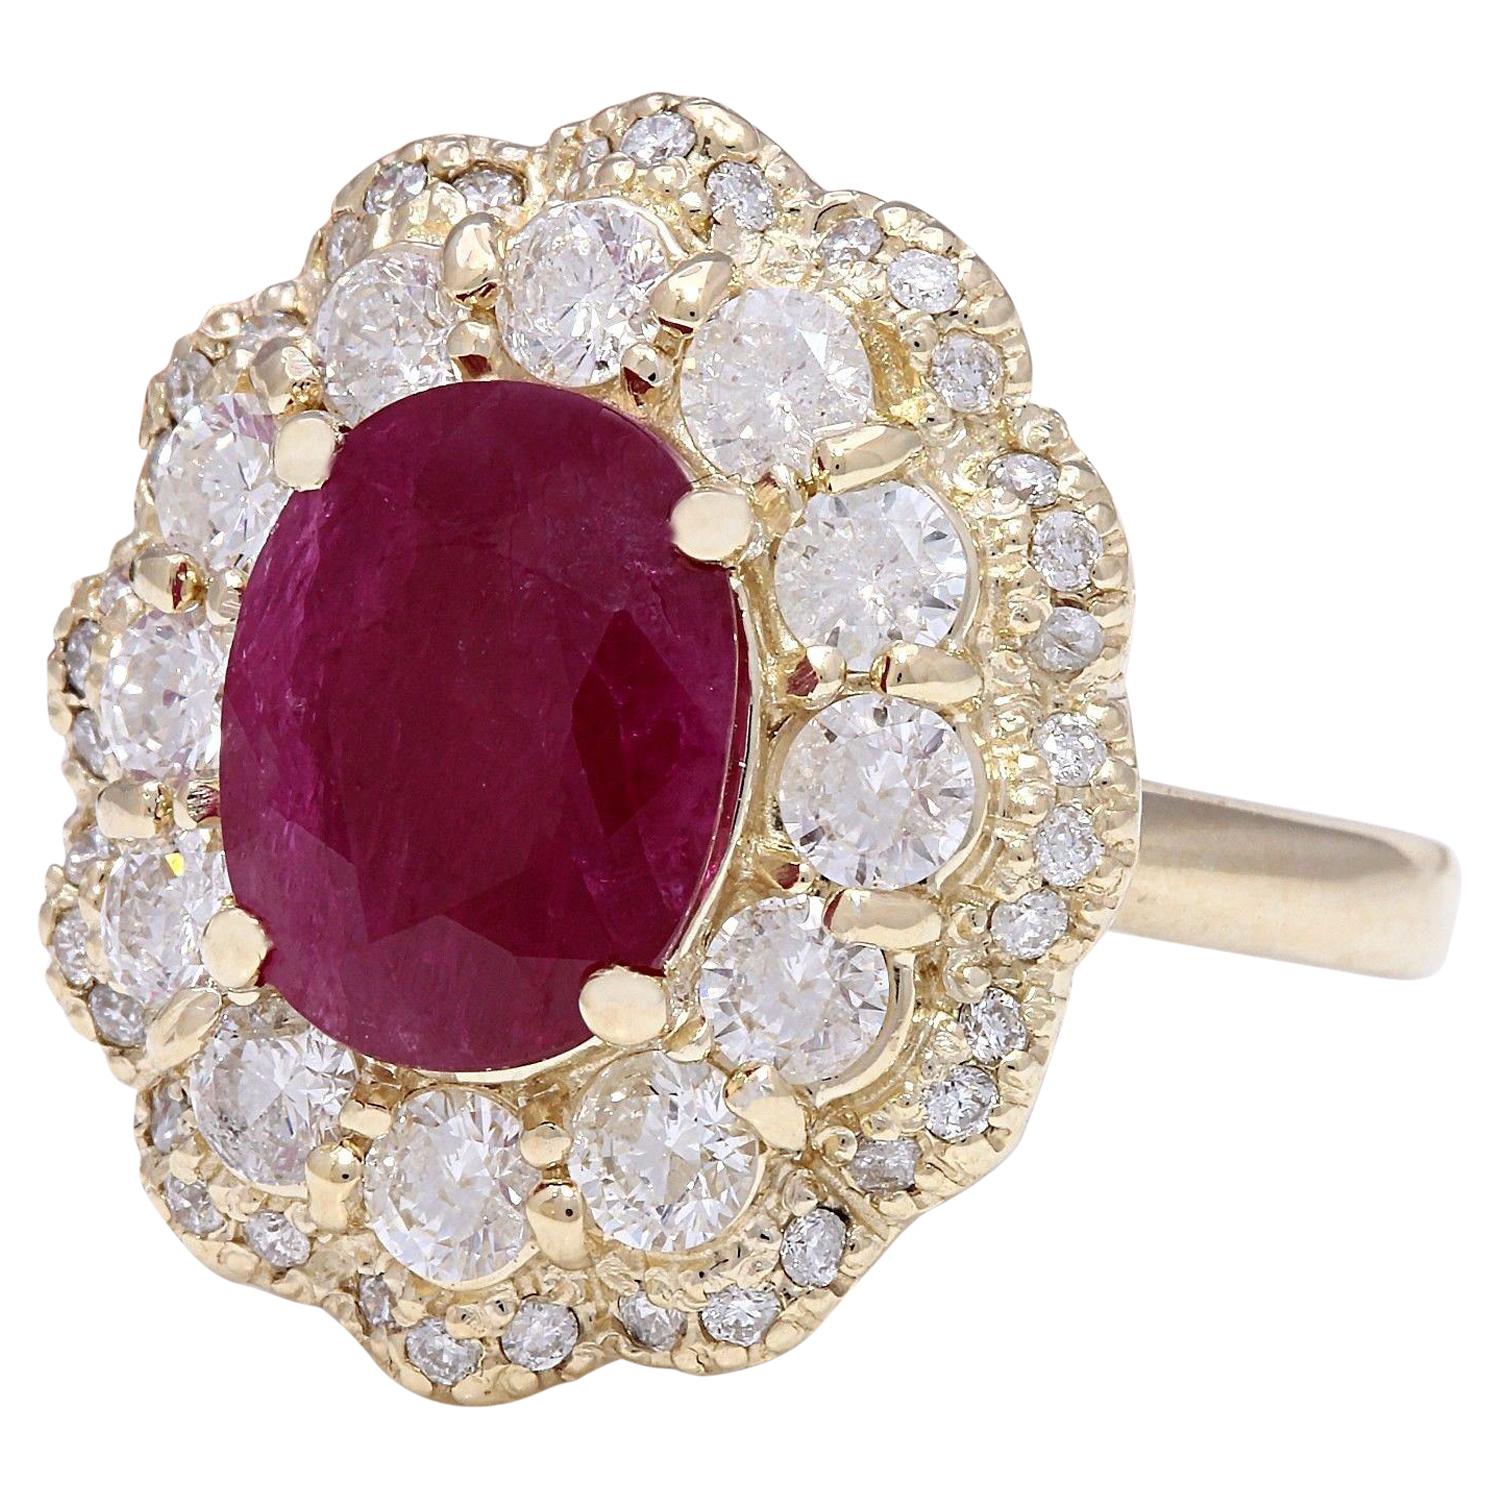 Introducing our breathtaking 4.78 Carat Natural Ruby 14K Solid Yellow Gold Diamond Ring, a masterpiece of elegance and allure. This exquisite ring features a radiant oval-cut ruby at its center, weighing 3.10 carats and measuring 10.00x8.00 mm,